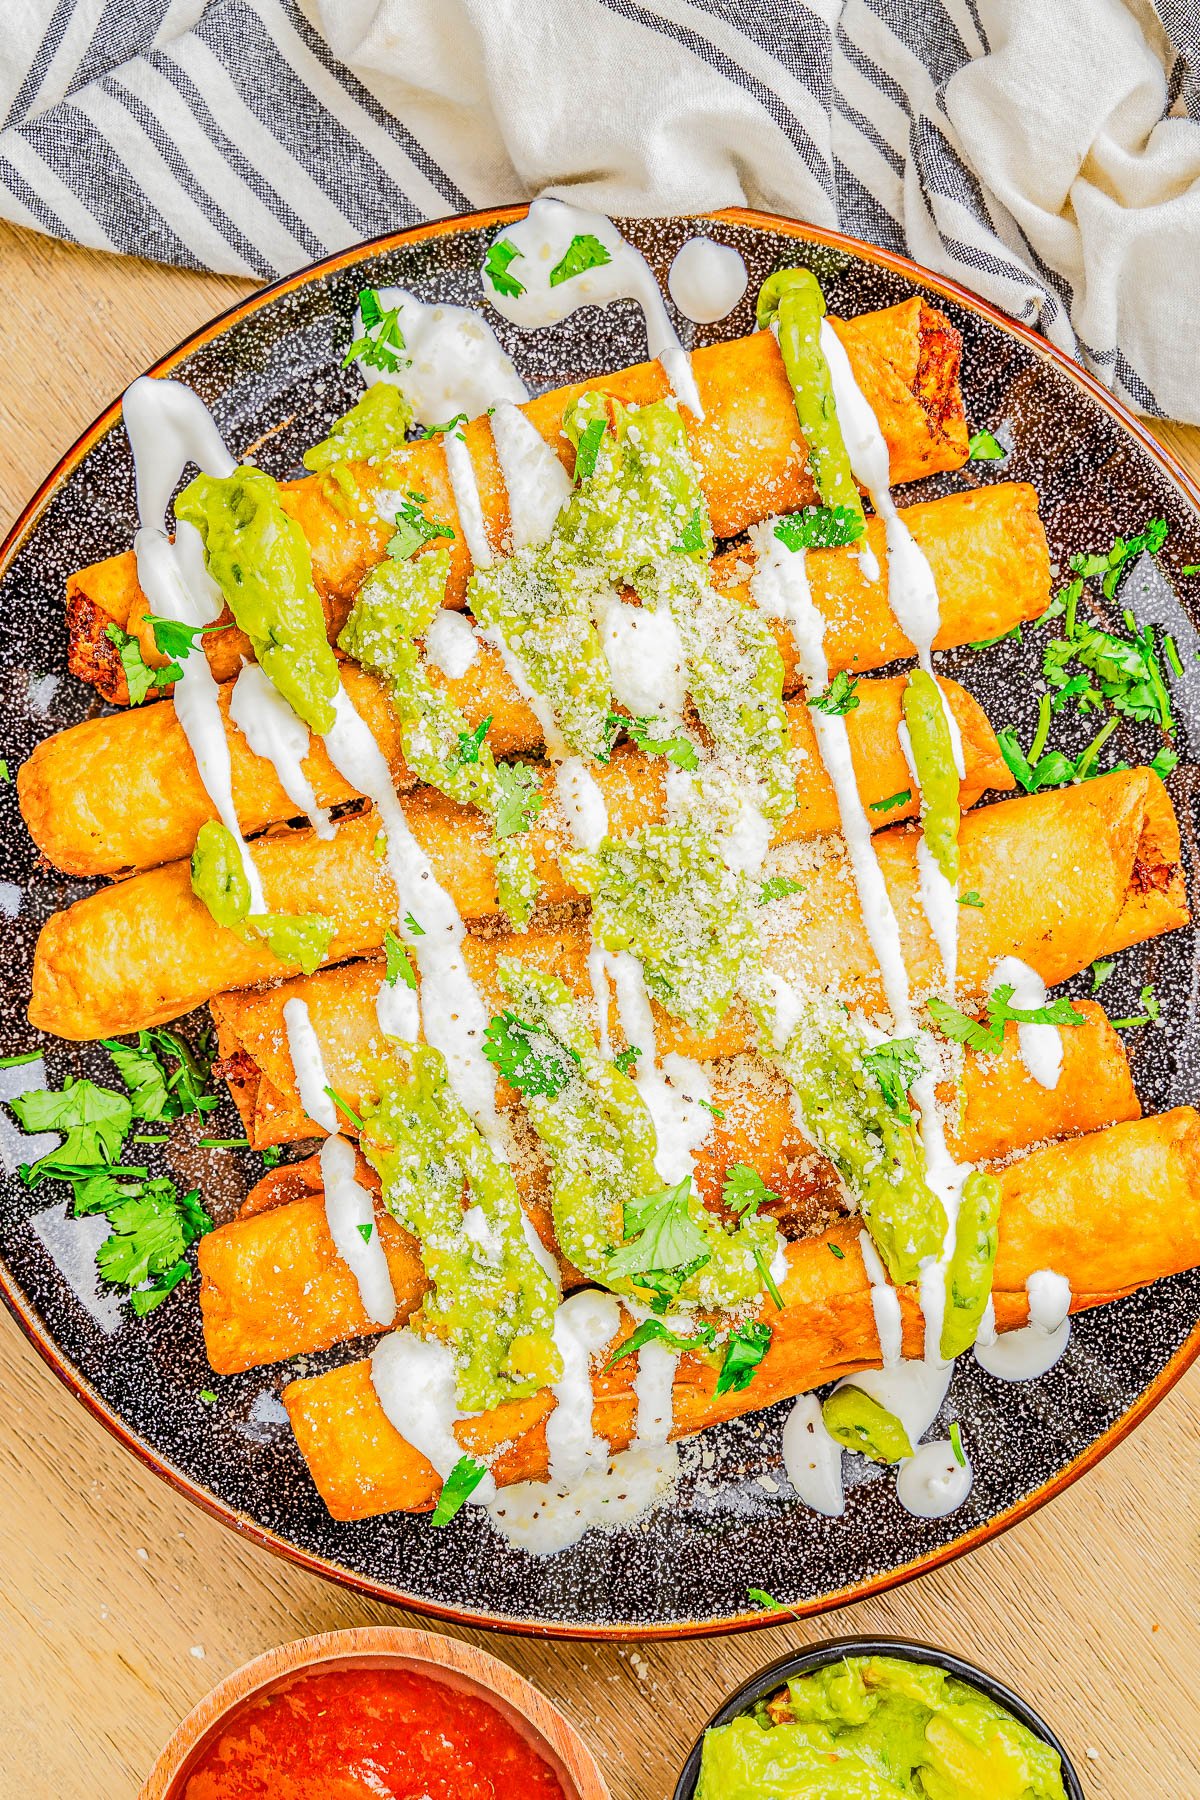 A plate of taquitos covered in green and white sauces, sprinkled with cheese, served with sides of red and green salsas and guacamole.